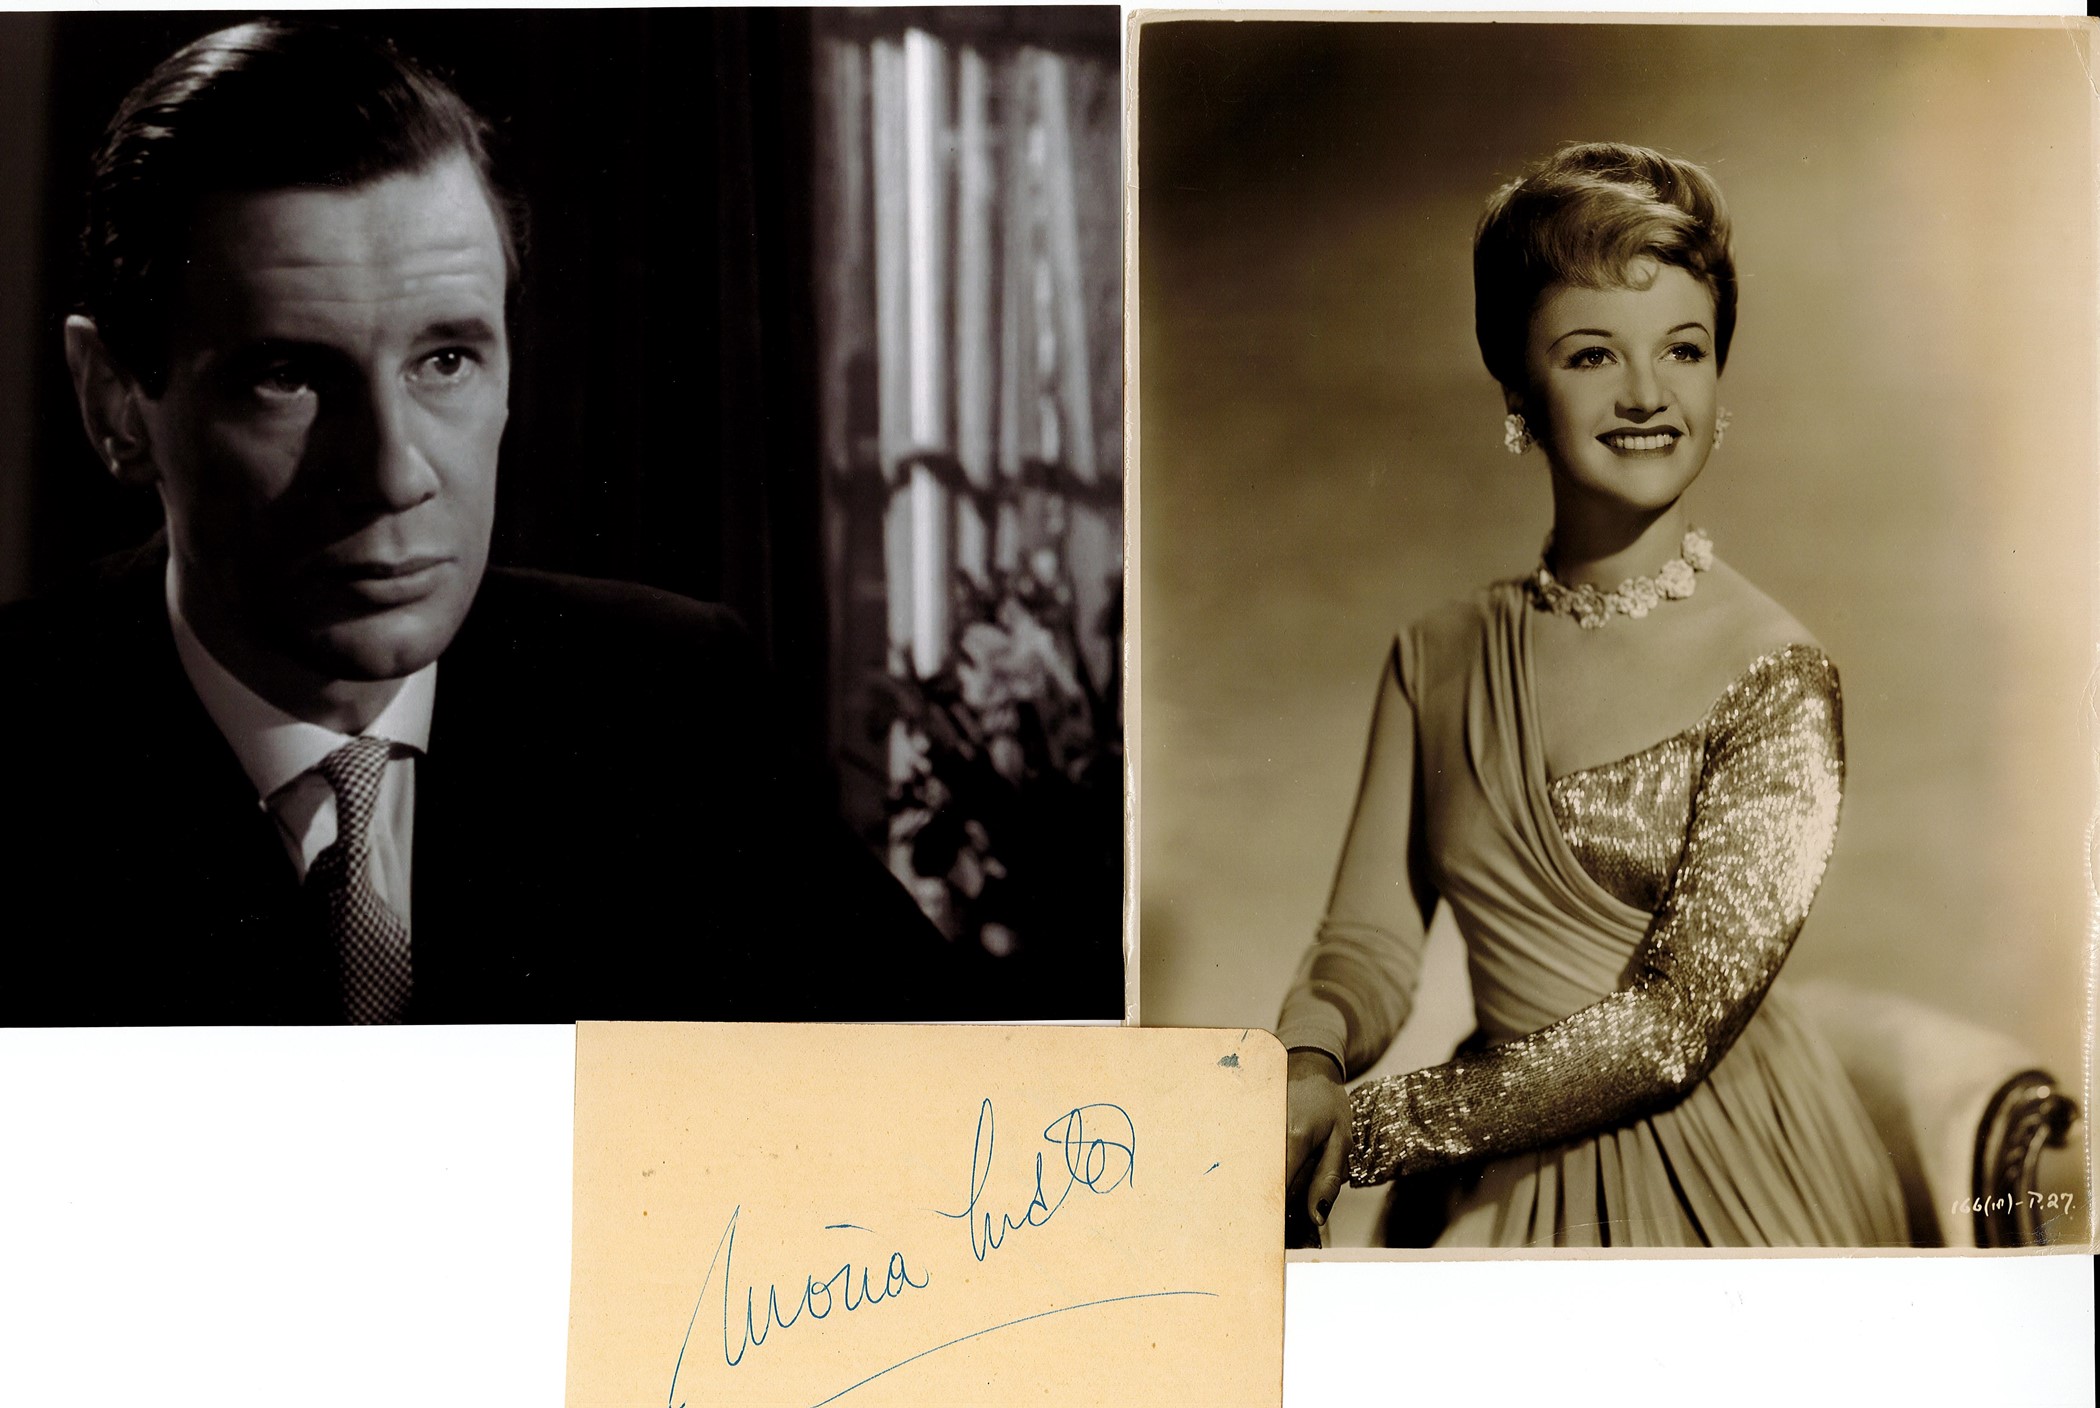 Actors Moira Lister and James Donald Signed Autograph Album Page With 2 Photos of the Pair. Moira